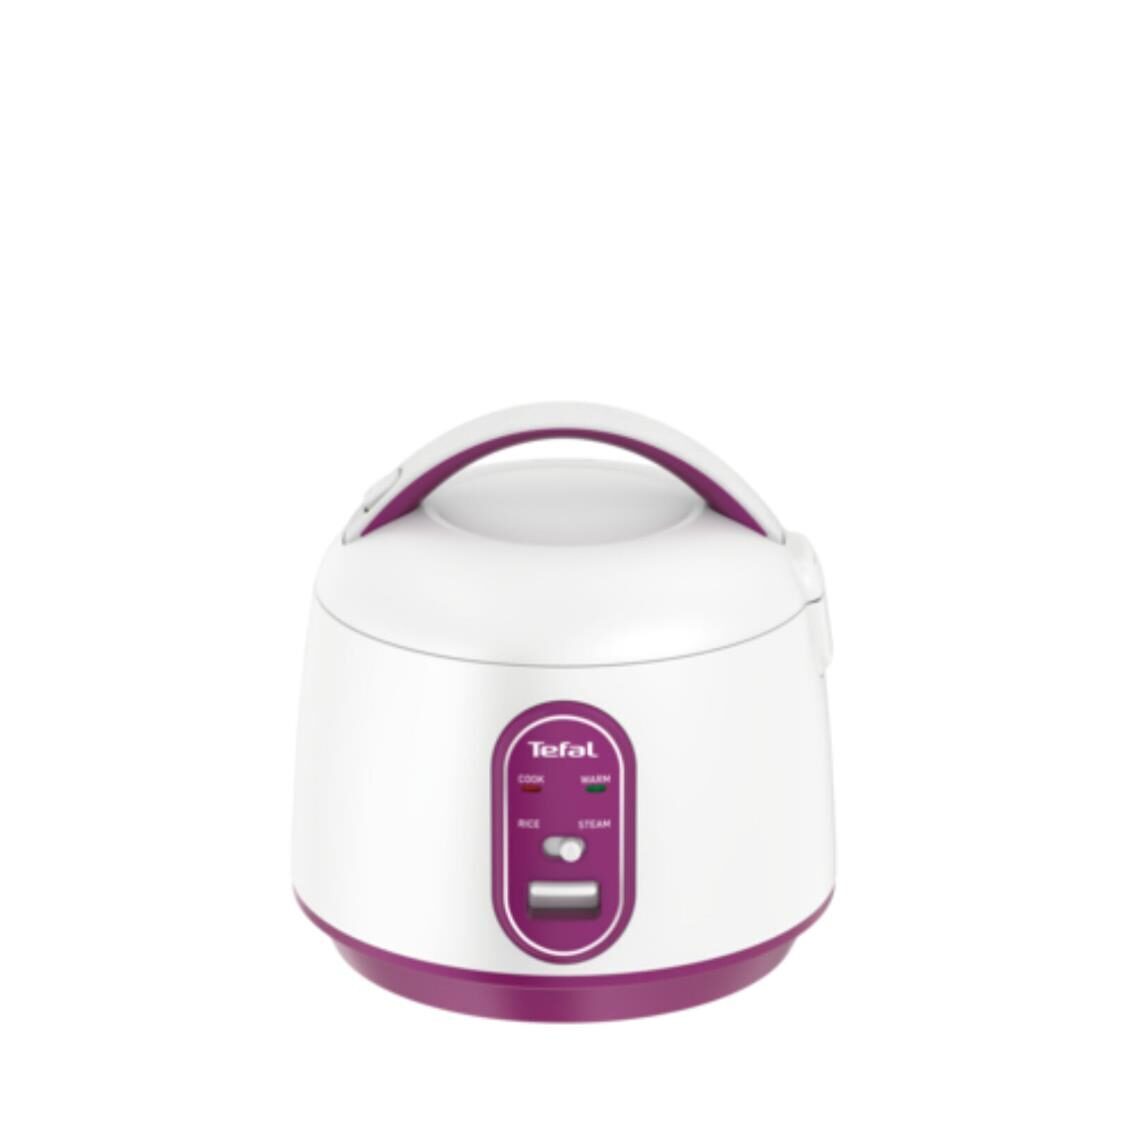 Tefal Mechanical Mini Rice Cooker 4 Cups with Non-Stick Coating RK2241